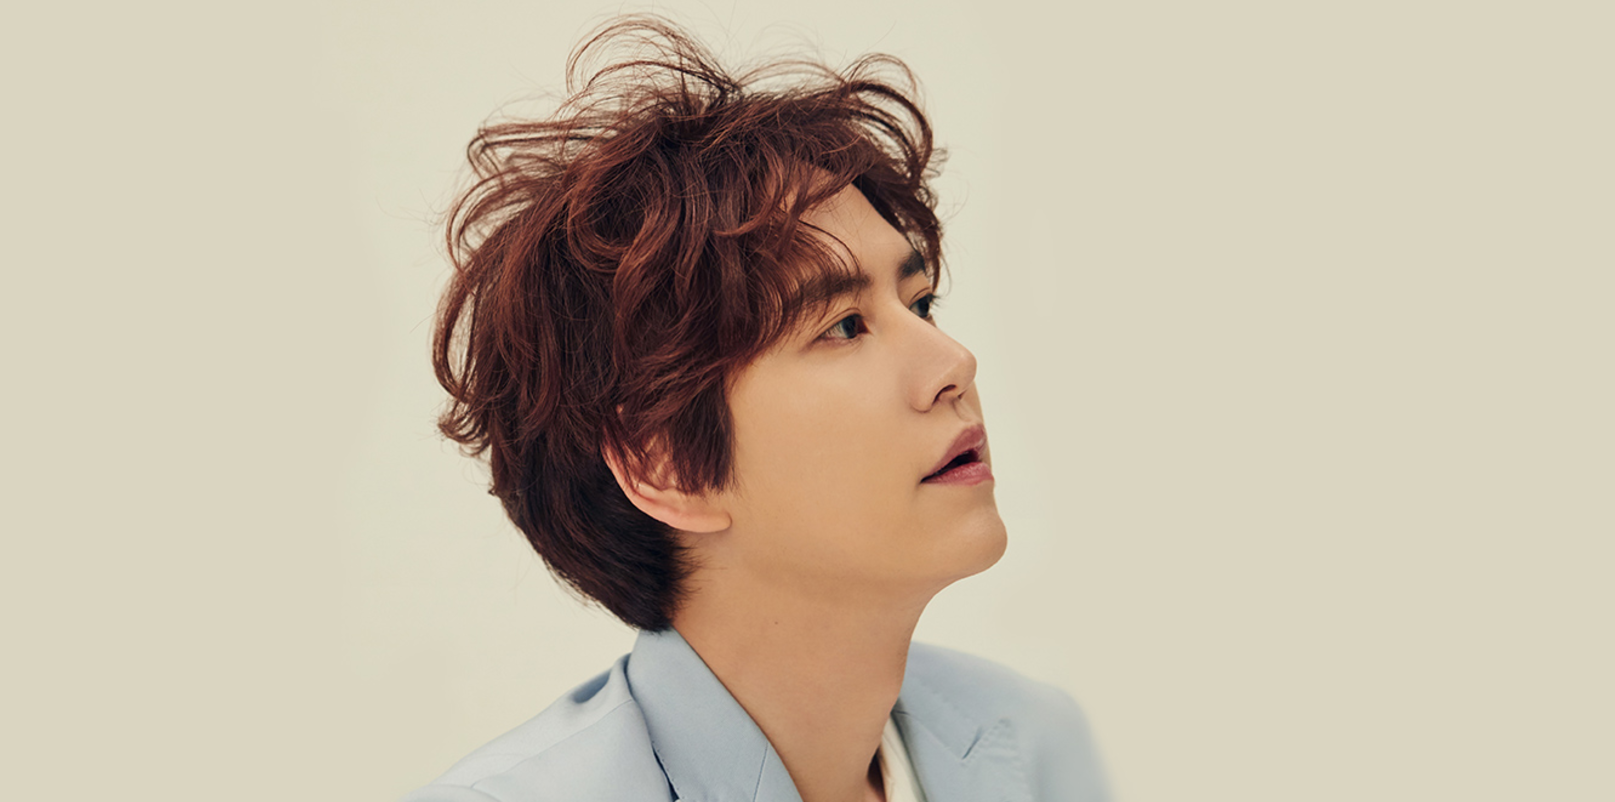 Source: Kyuhyun's Official Website